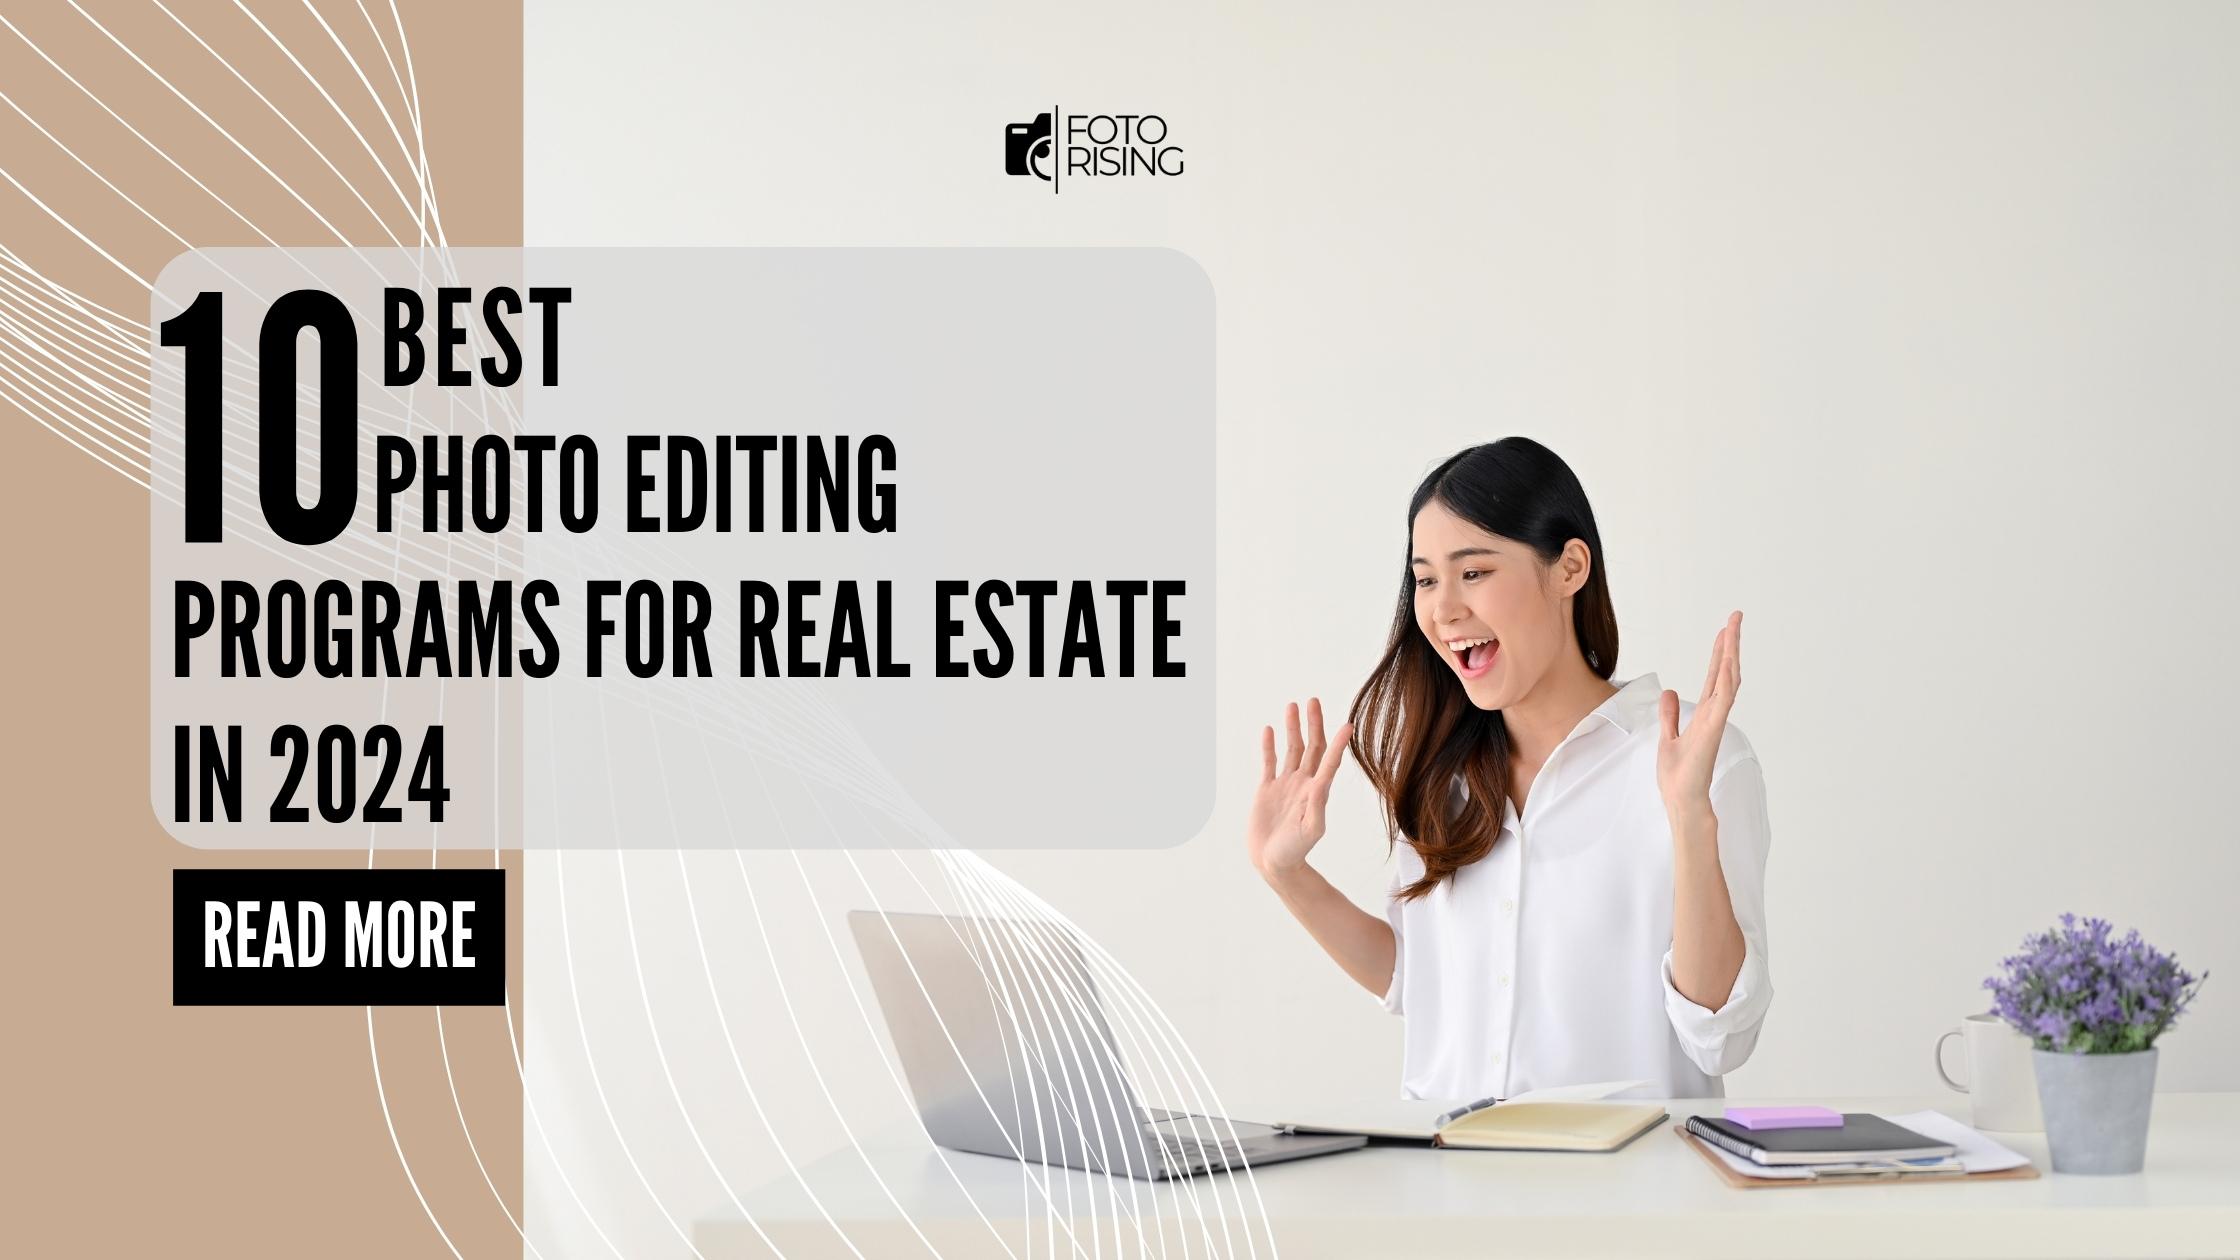 10 Best Photo Editing Programs for Real Estate in 2024